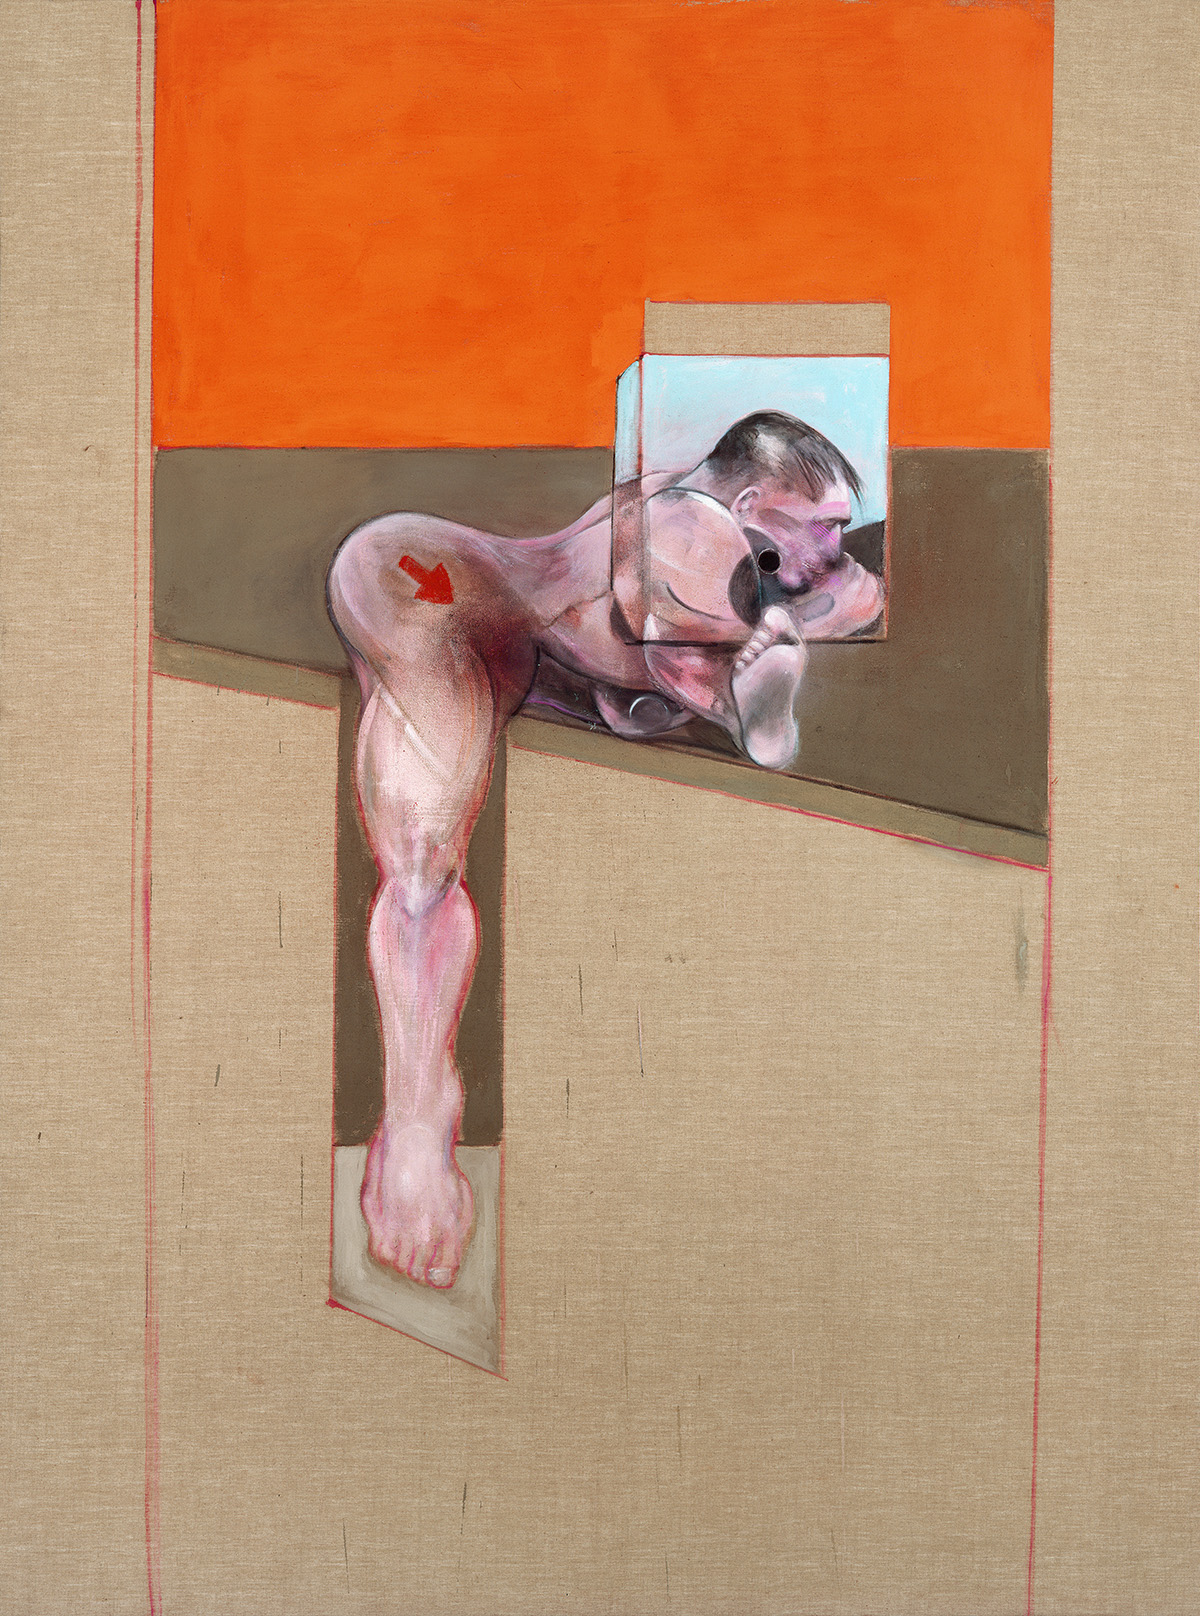 Study from the Human Body, 1991. Oil, pastel and aerosol paint on canvas. CR no. 91-03. © The Estate of Francis Bacon / DACS London 2023. All rights reserved.